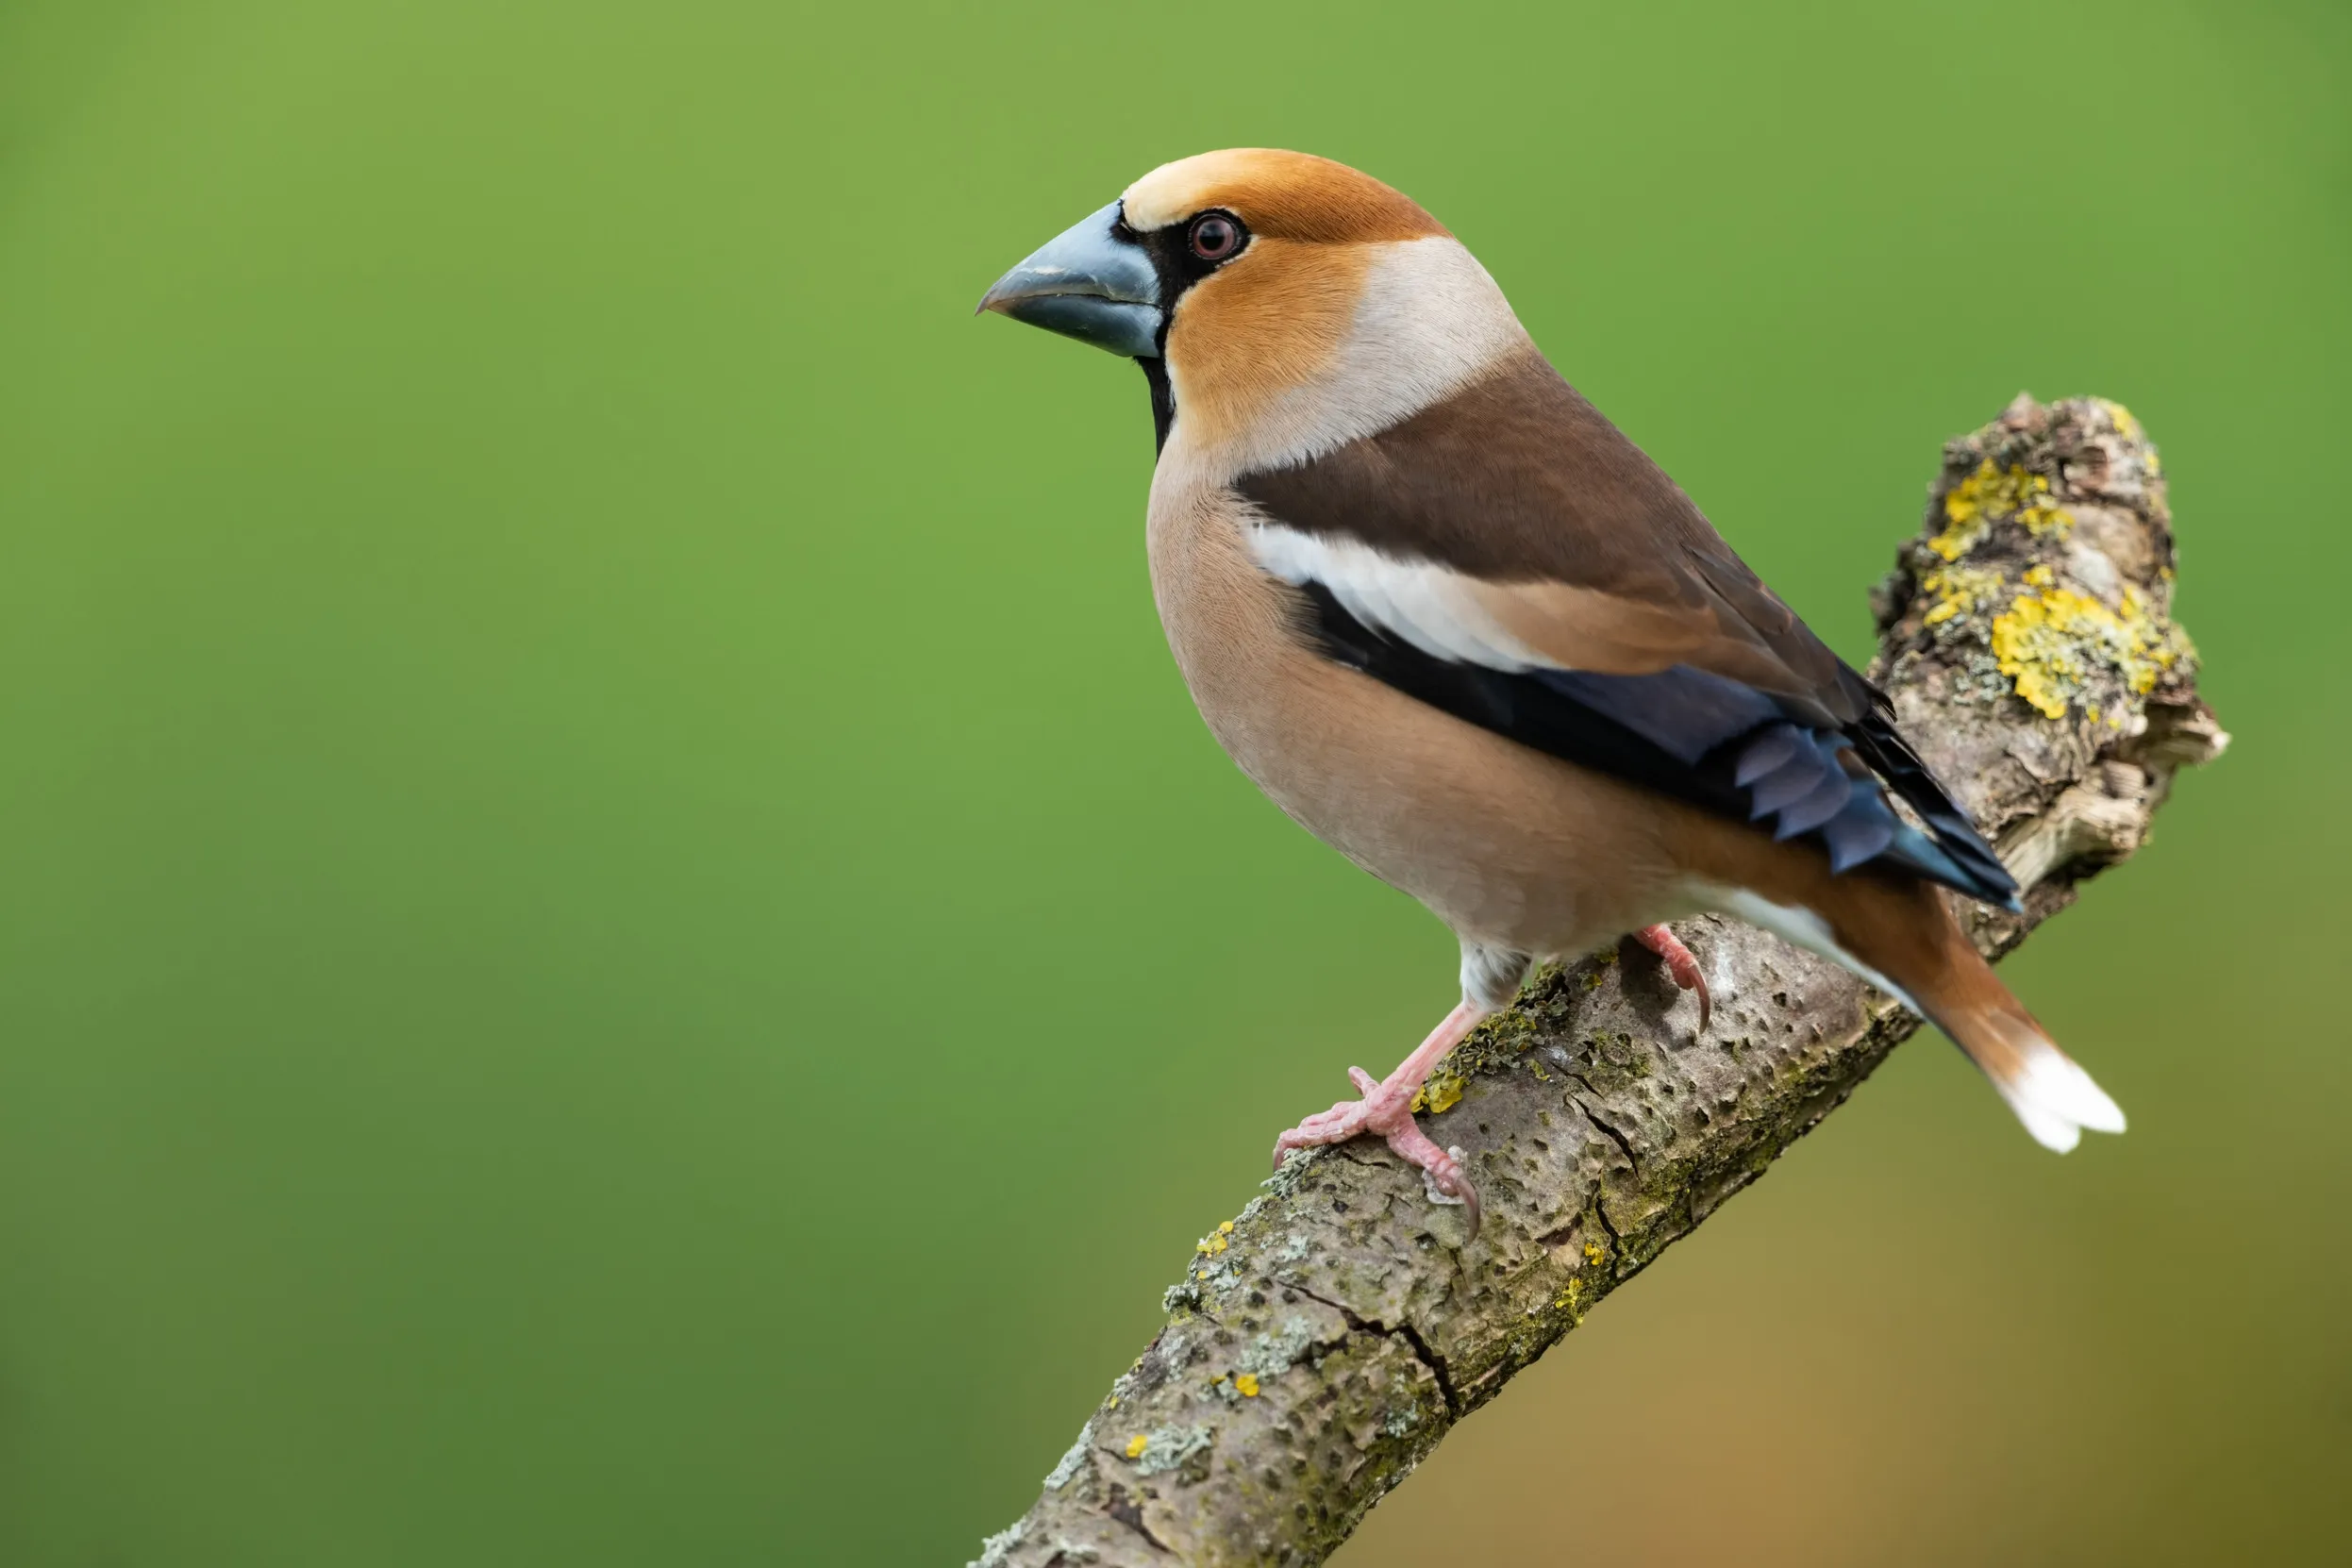 A male Hawfinch perched on a branch.